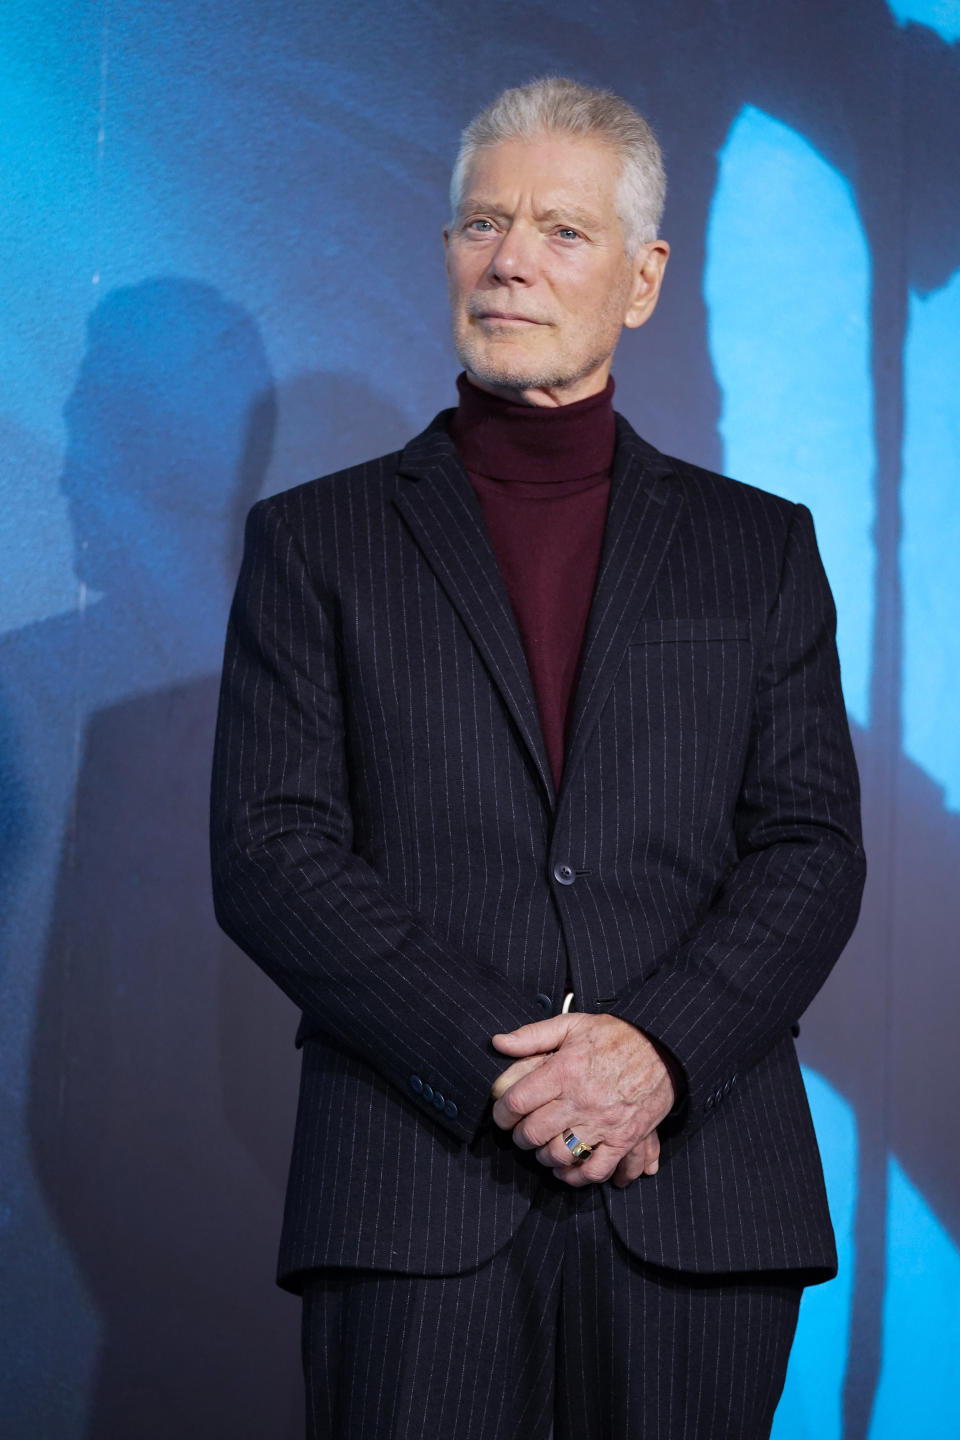 TOKYO, JAPAN – DECEMBER 10: Stephen Lang attends the “Avatar: The Way of Water” Japan Premiere at TOHO Cinemas Hibiya on December 10, 2022 in Tokyo, Japan. (Photo by Christopher Jue/Getty Images for Disney)